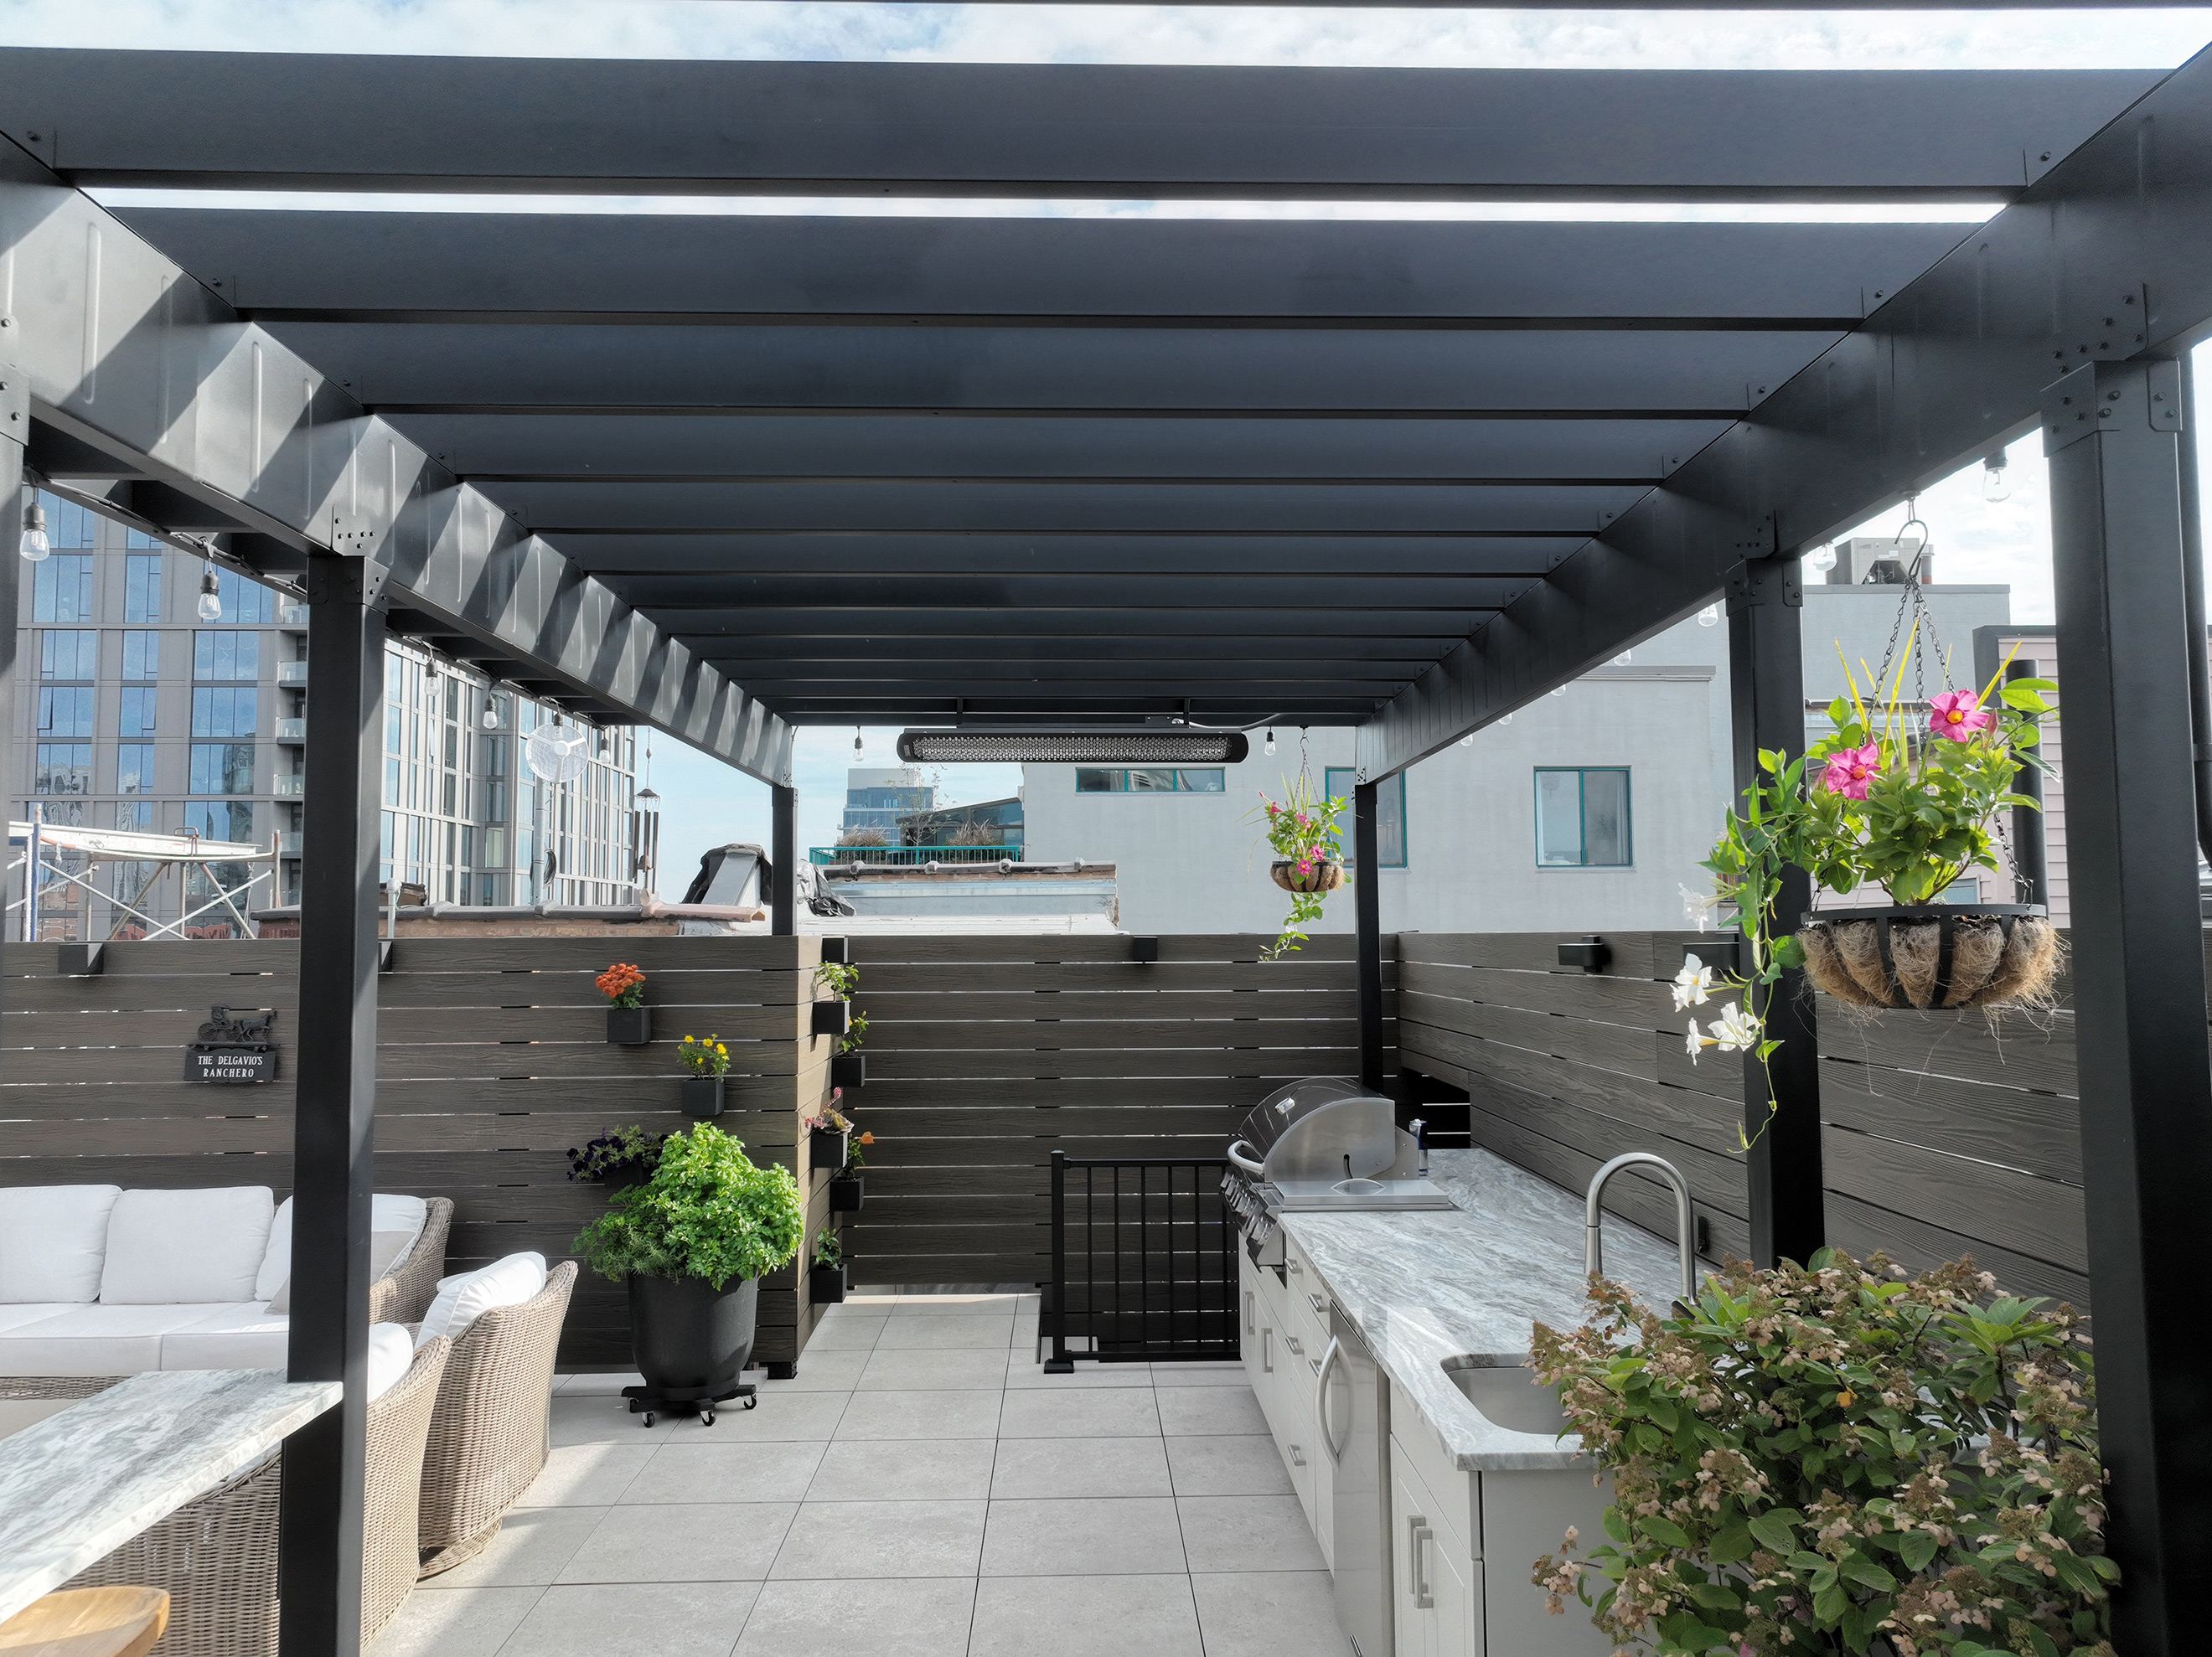 Outdoor steel pergola over outdoor kitchen space with buildings in the background.